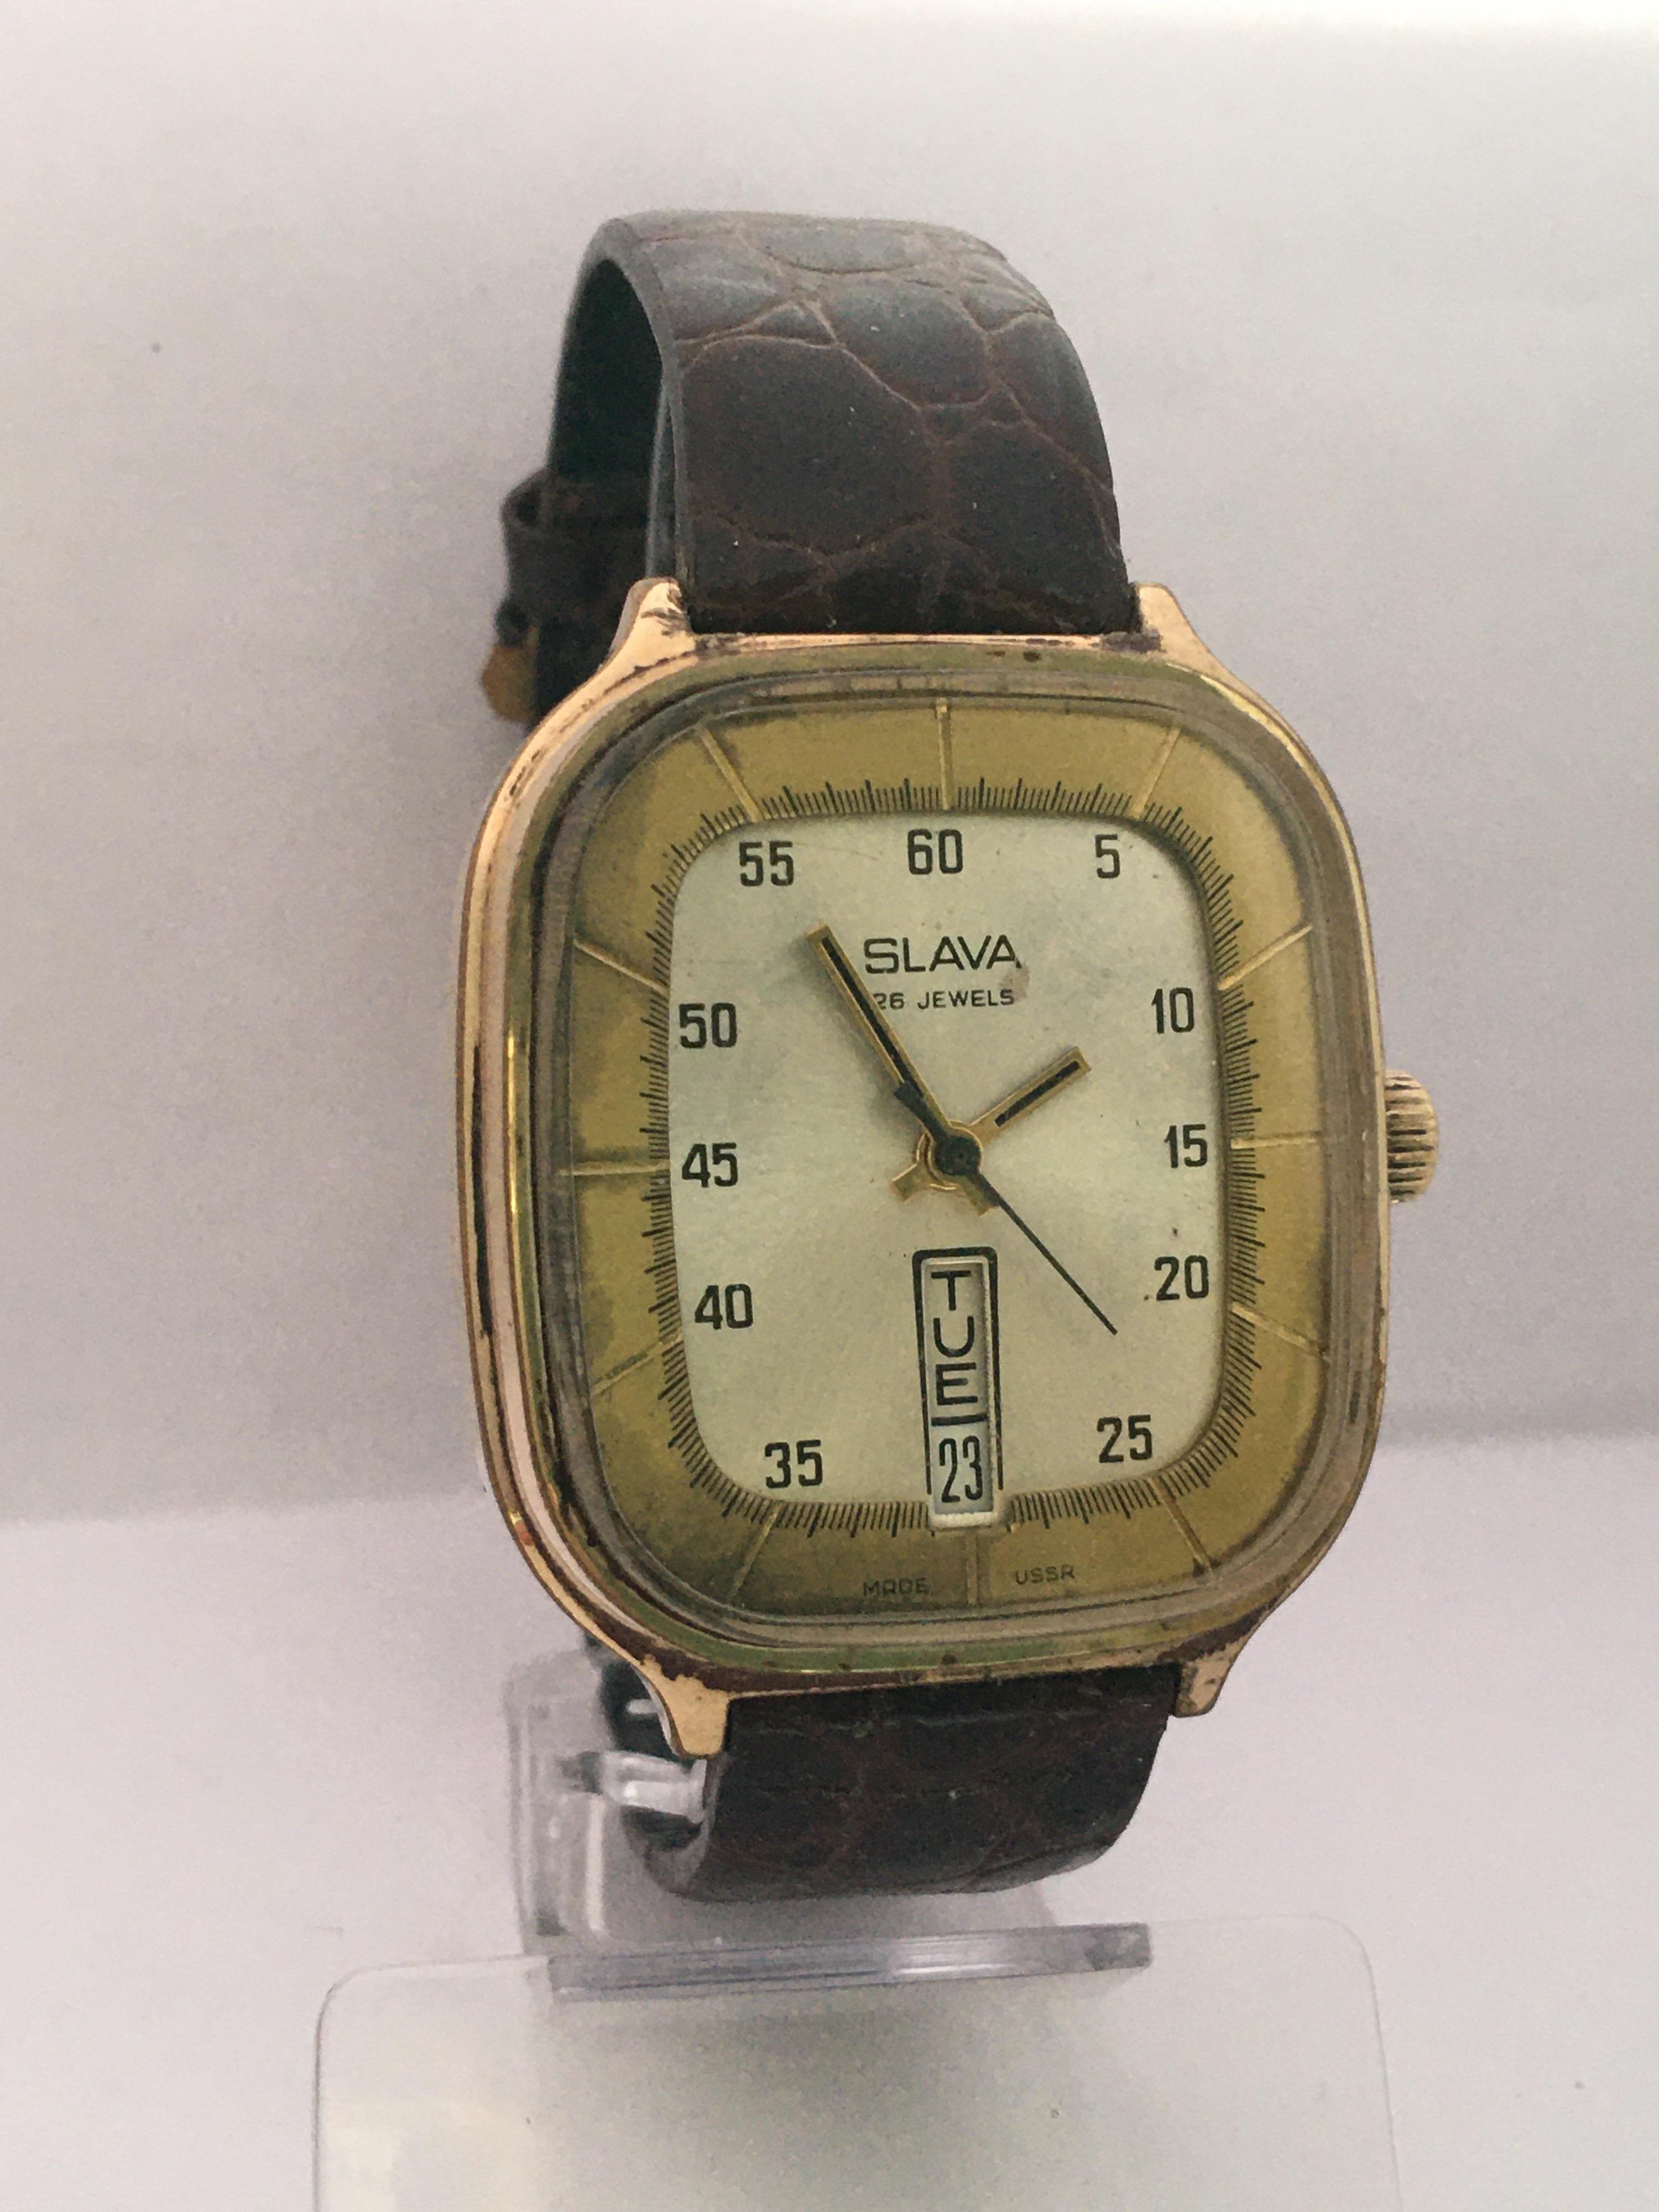 Vintage 1970s Gold-Plated Slava 26 Jewels Date Mechanical Gents Watch For Sale 7